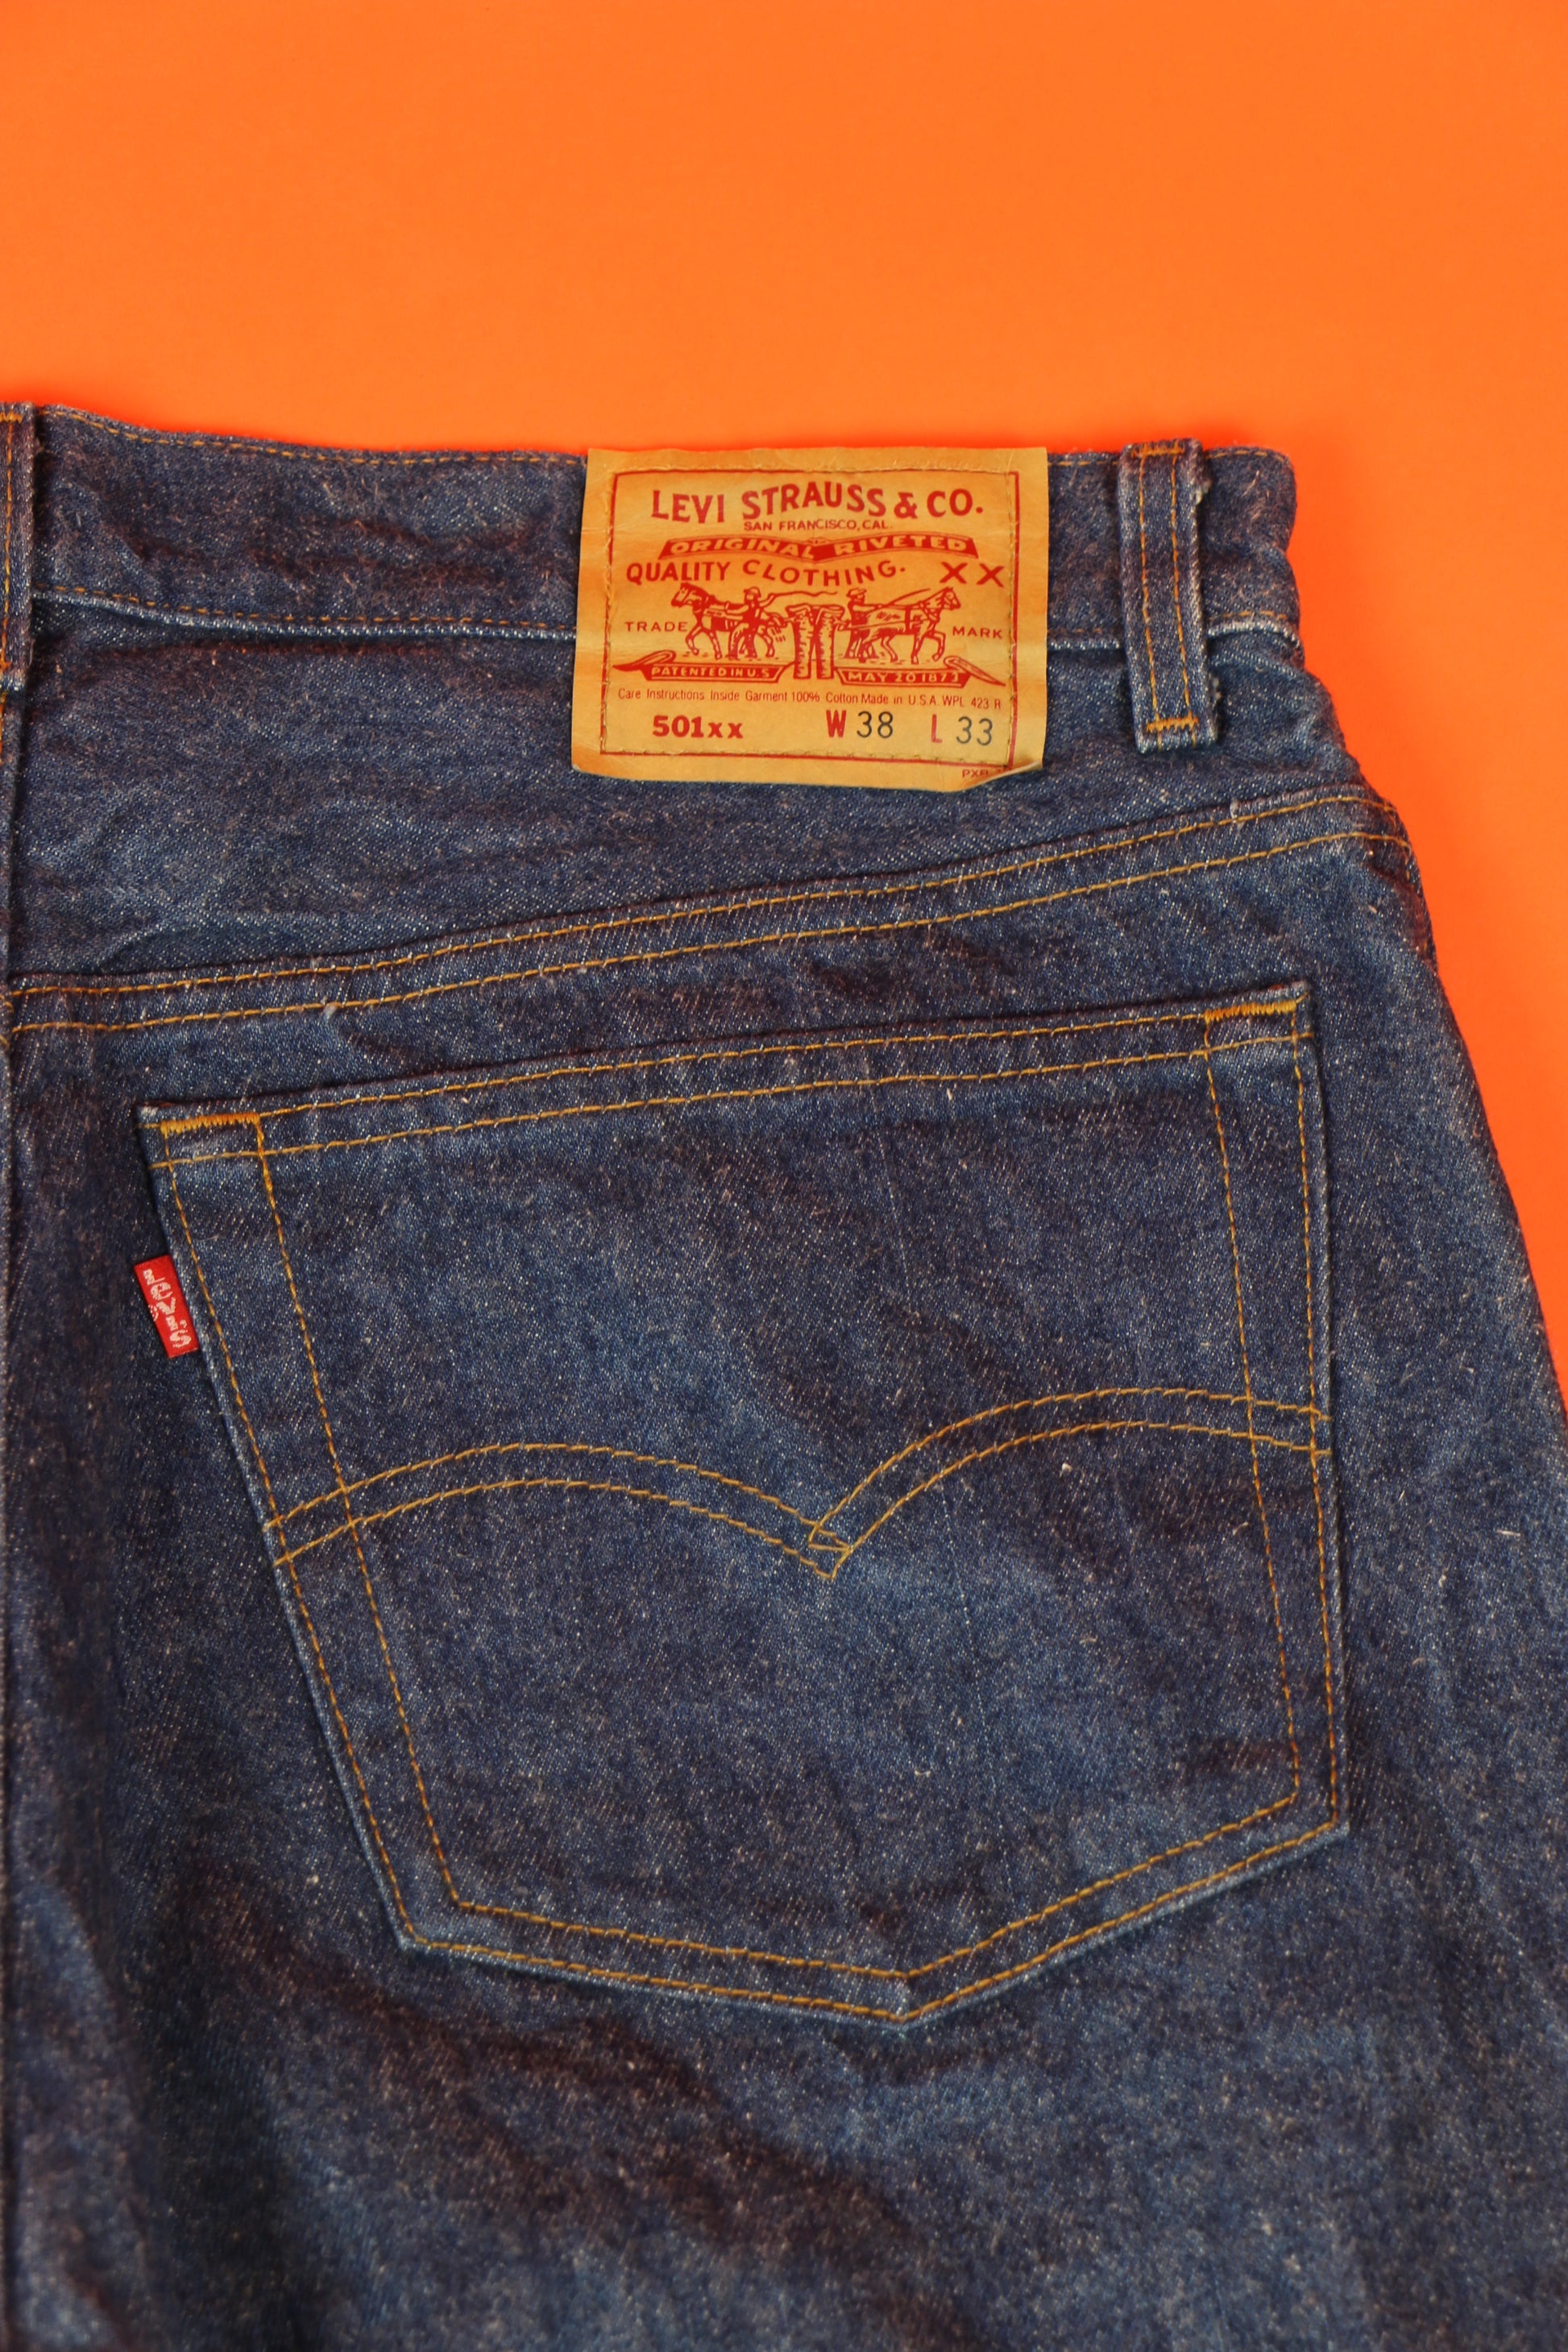 Levi's 501 Made in . Jeans W38 L33 ~ Vintage Store 